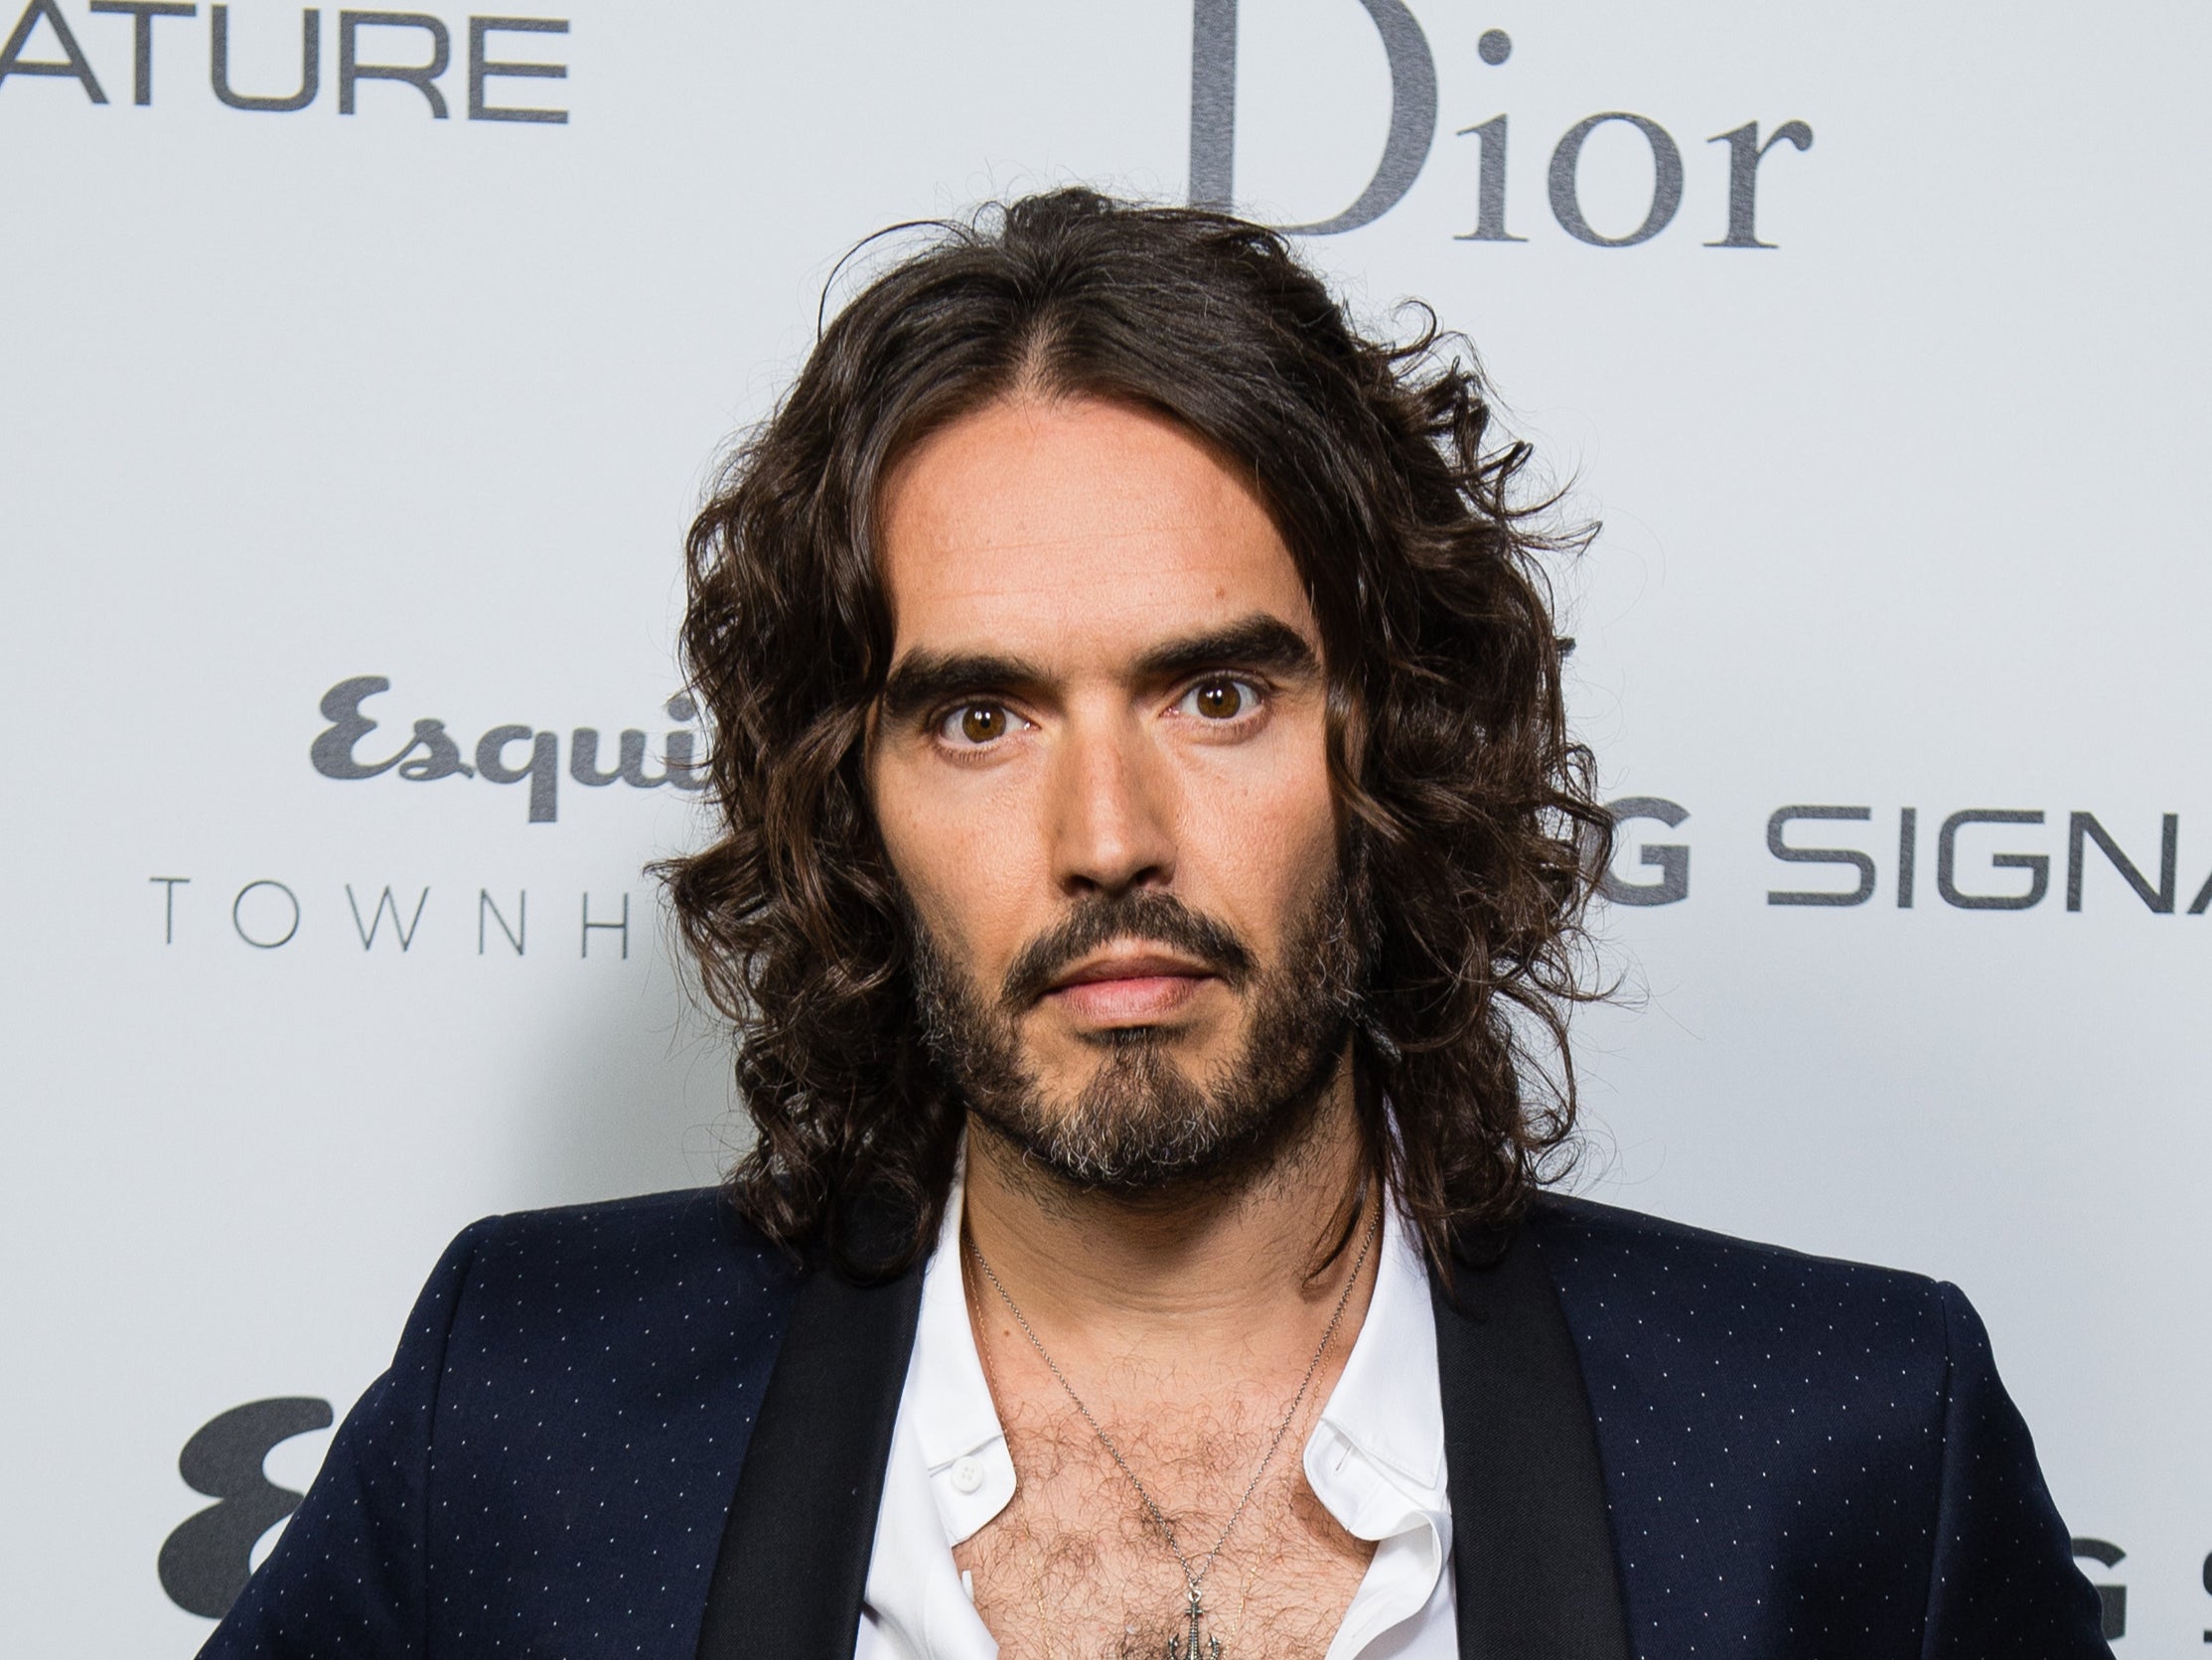 Russell Brand denied any wrongdoing when allegations emerged against him earlier this year